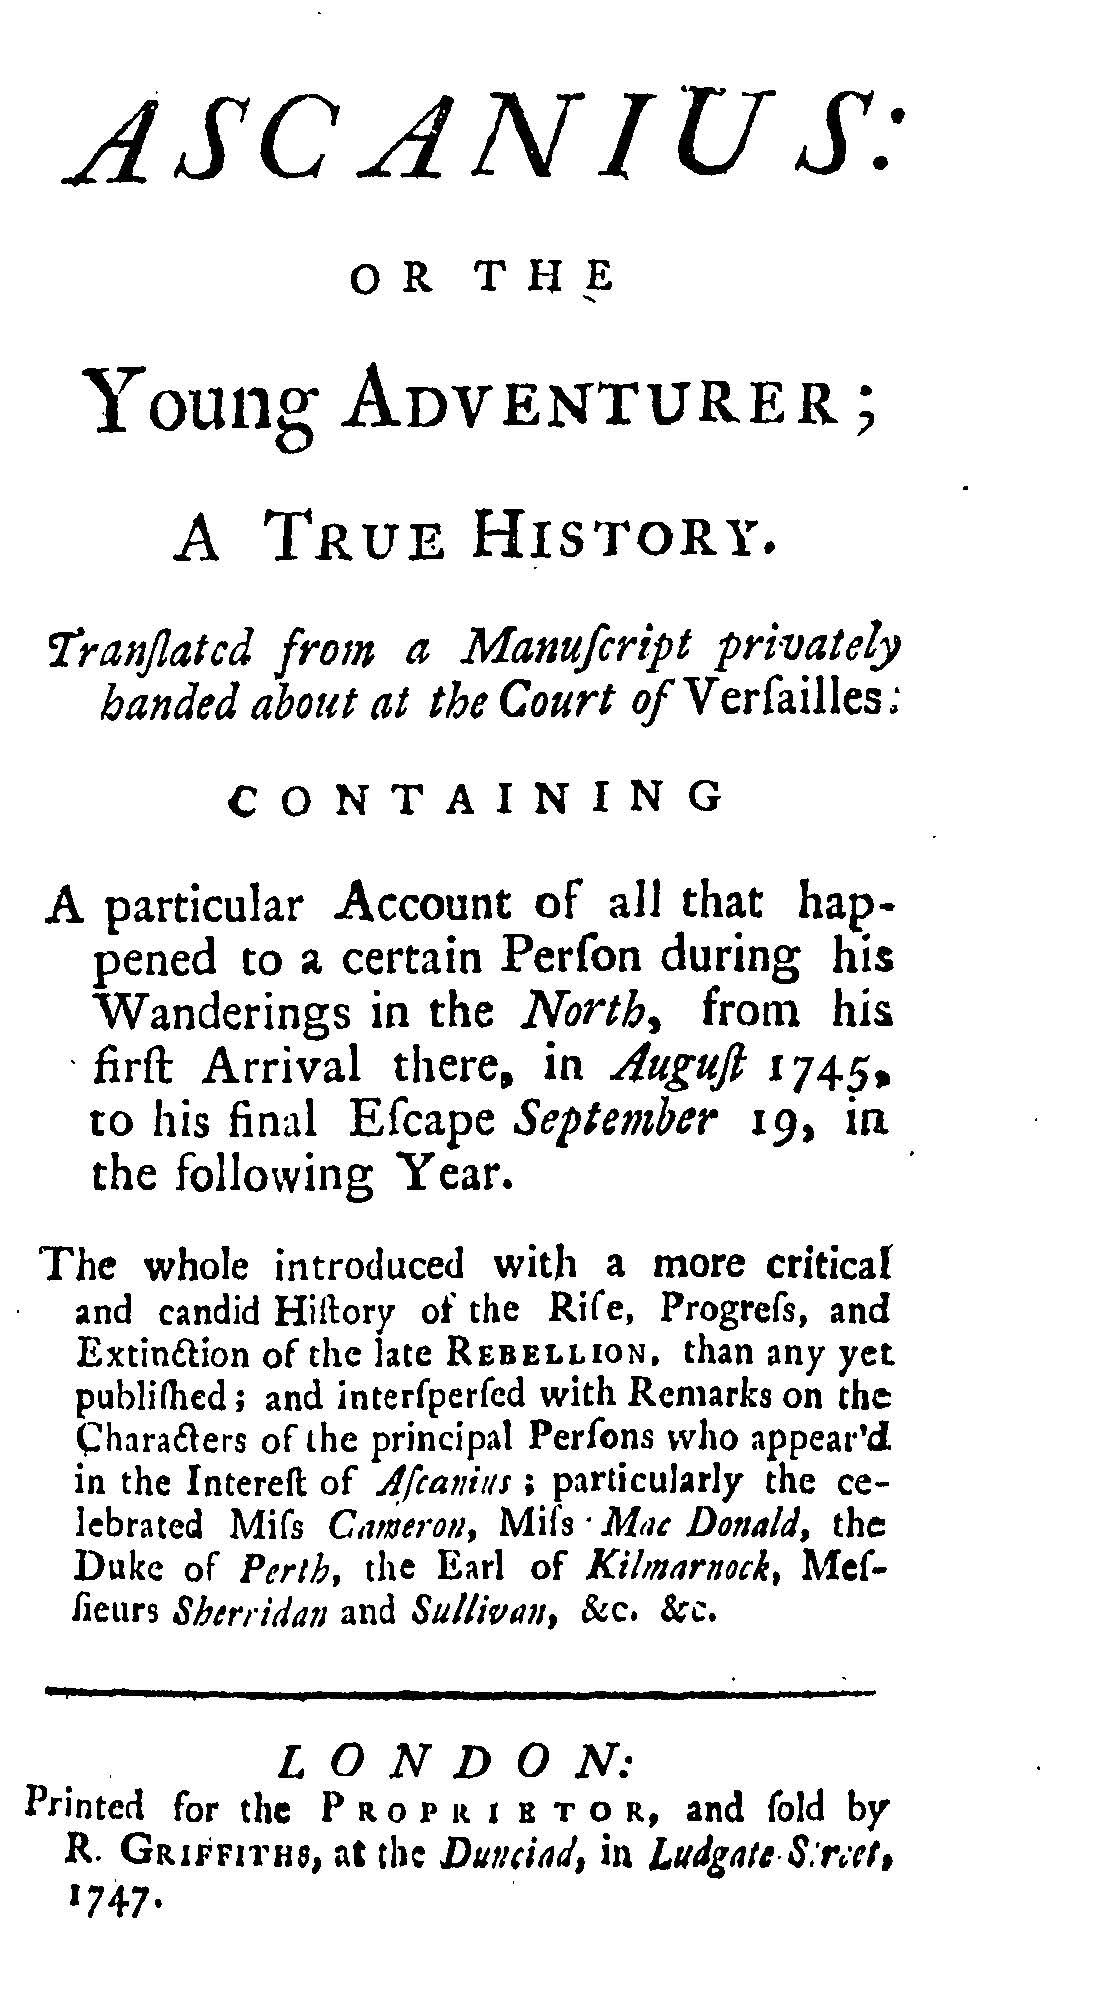 R. Griffiths First Edition 1747